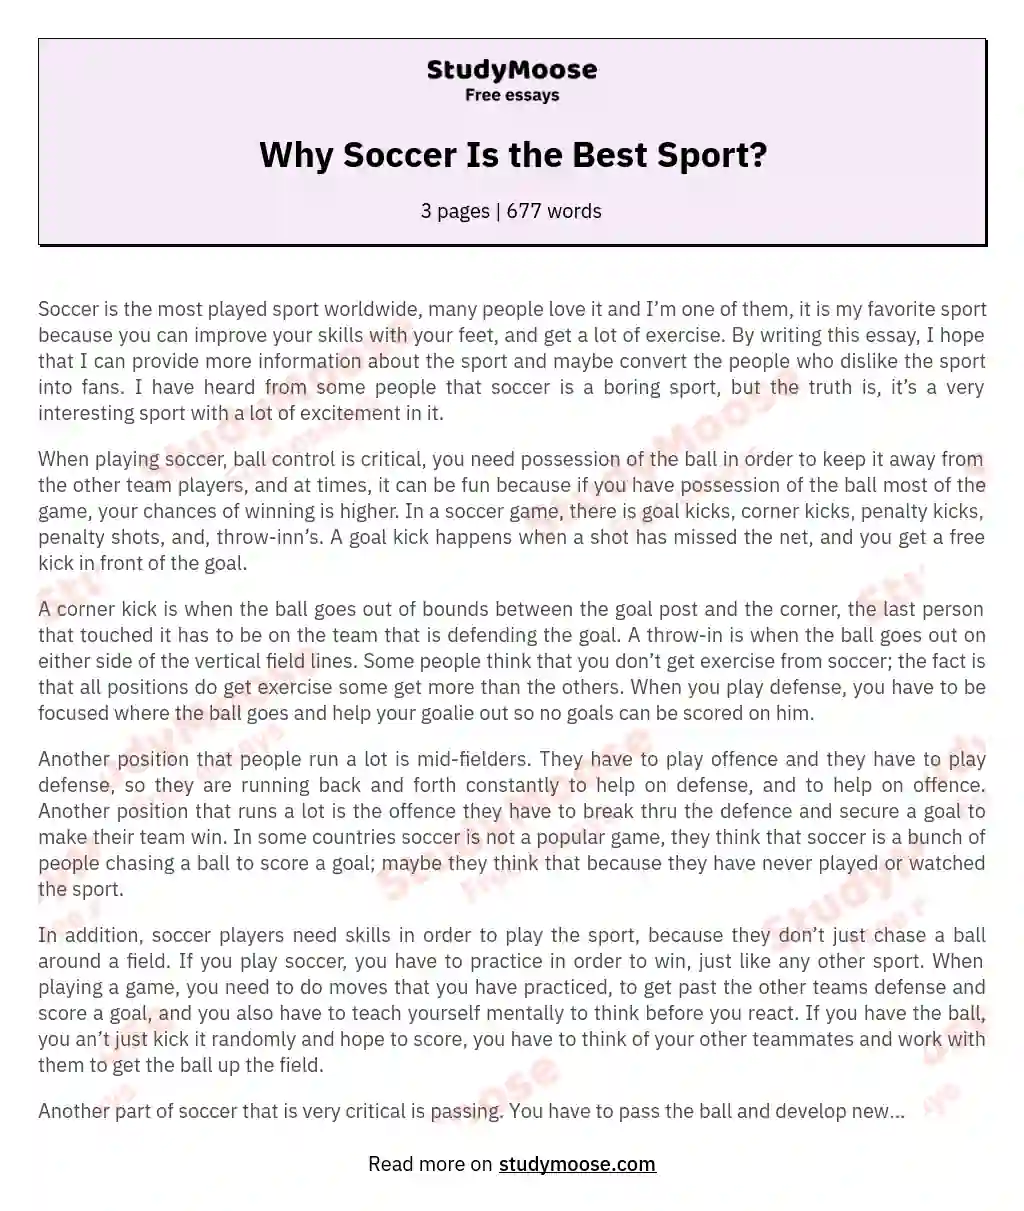 Why Soccer Is the Best Sport? essay